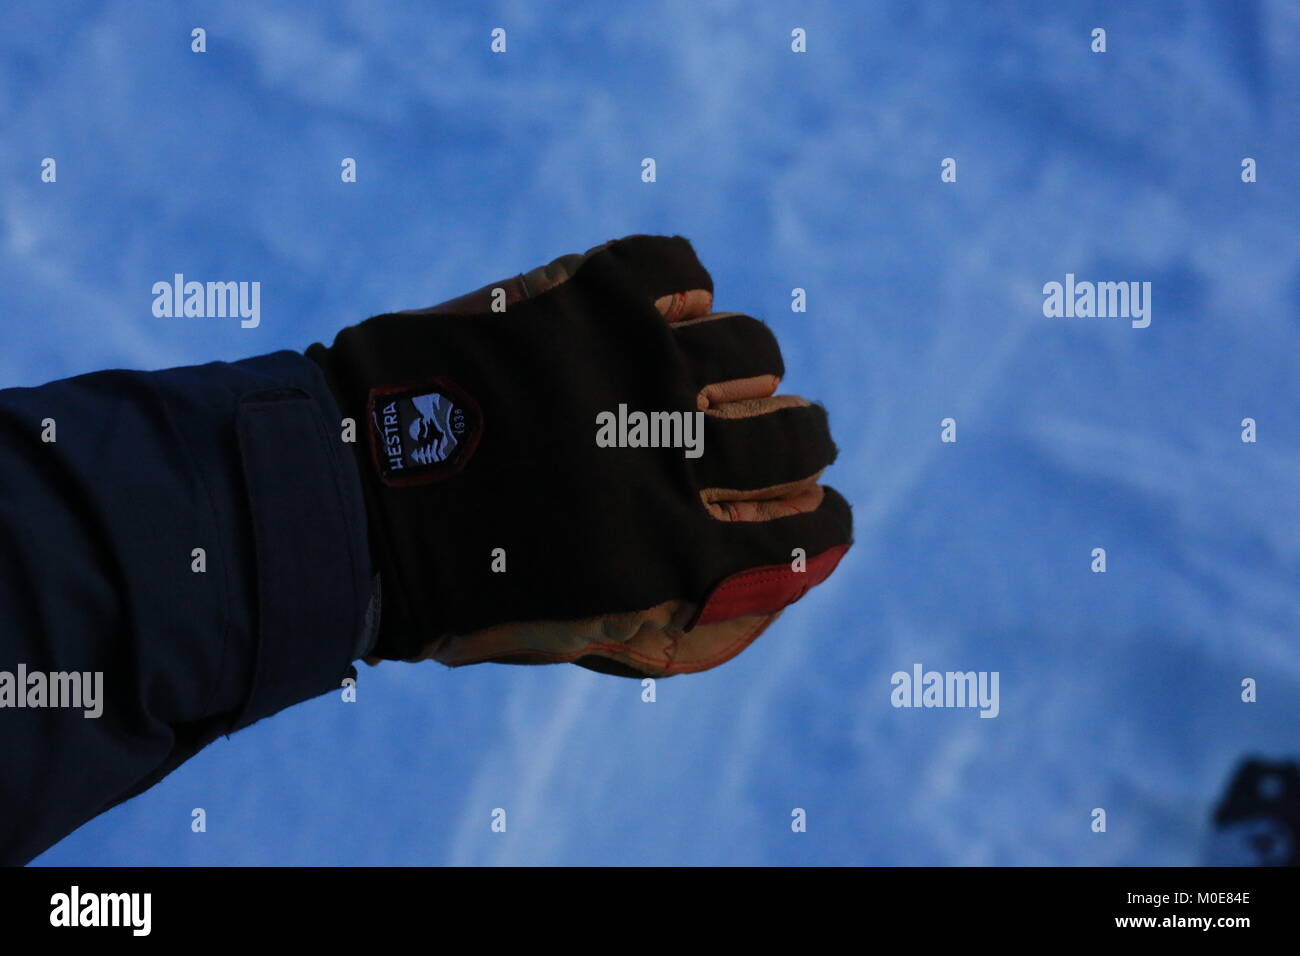 Skiers Hand In Glove, Snow background Stock Photo